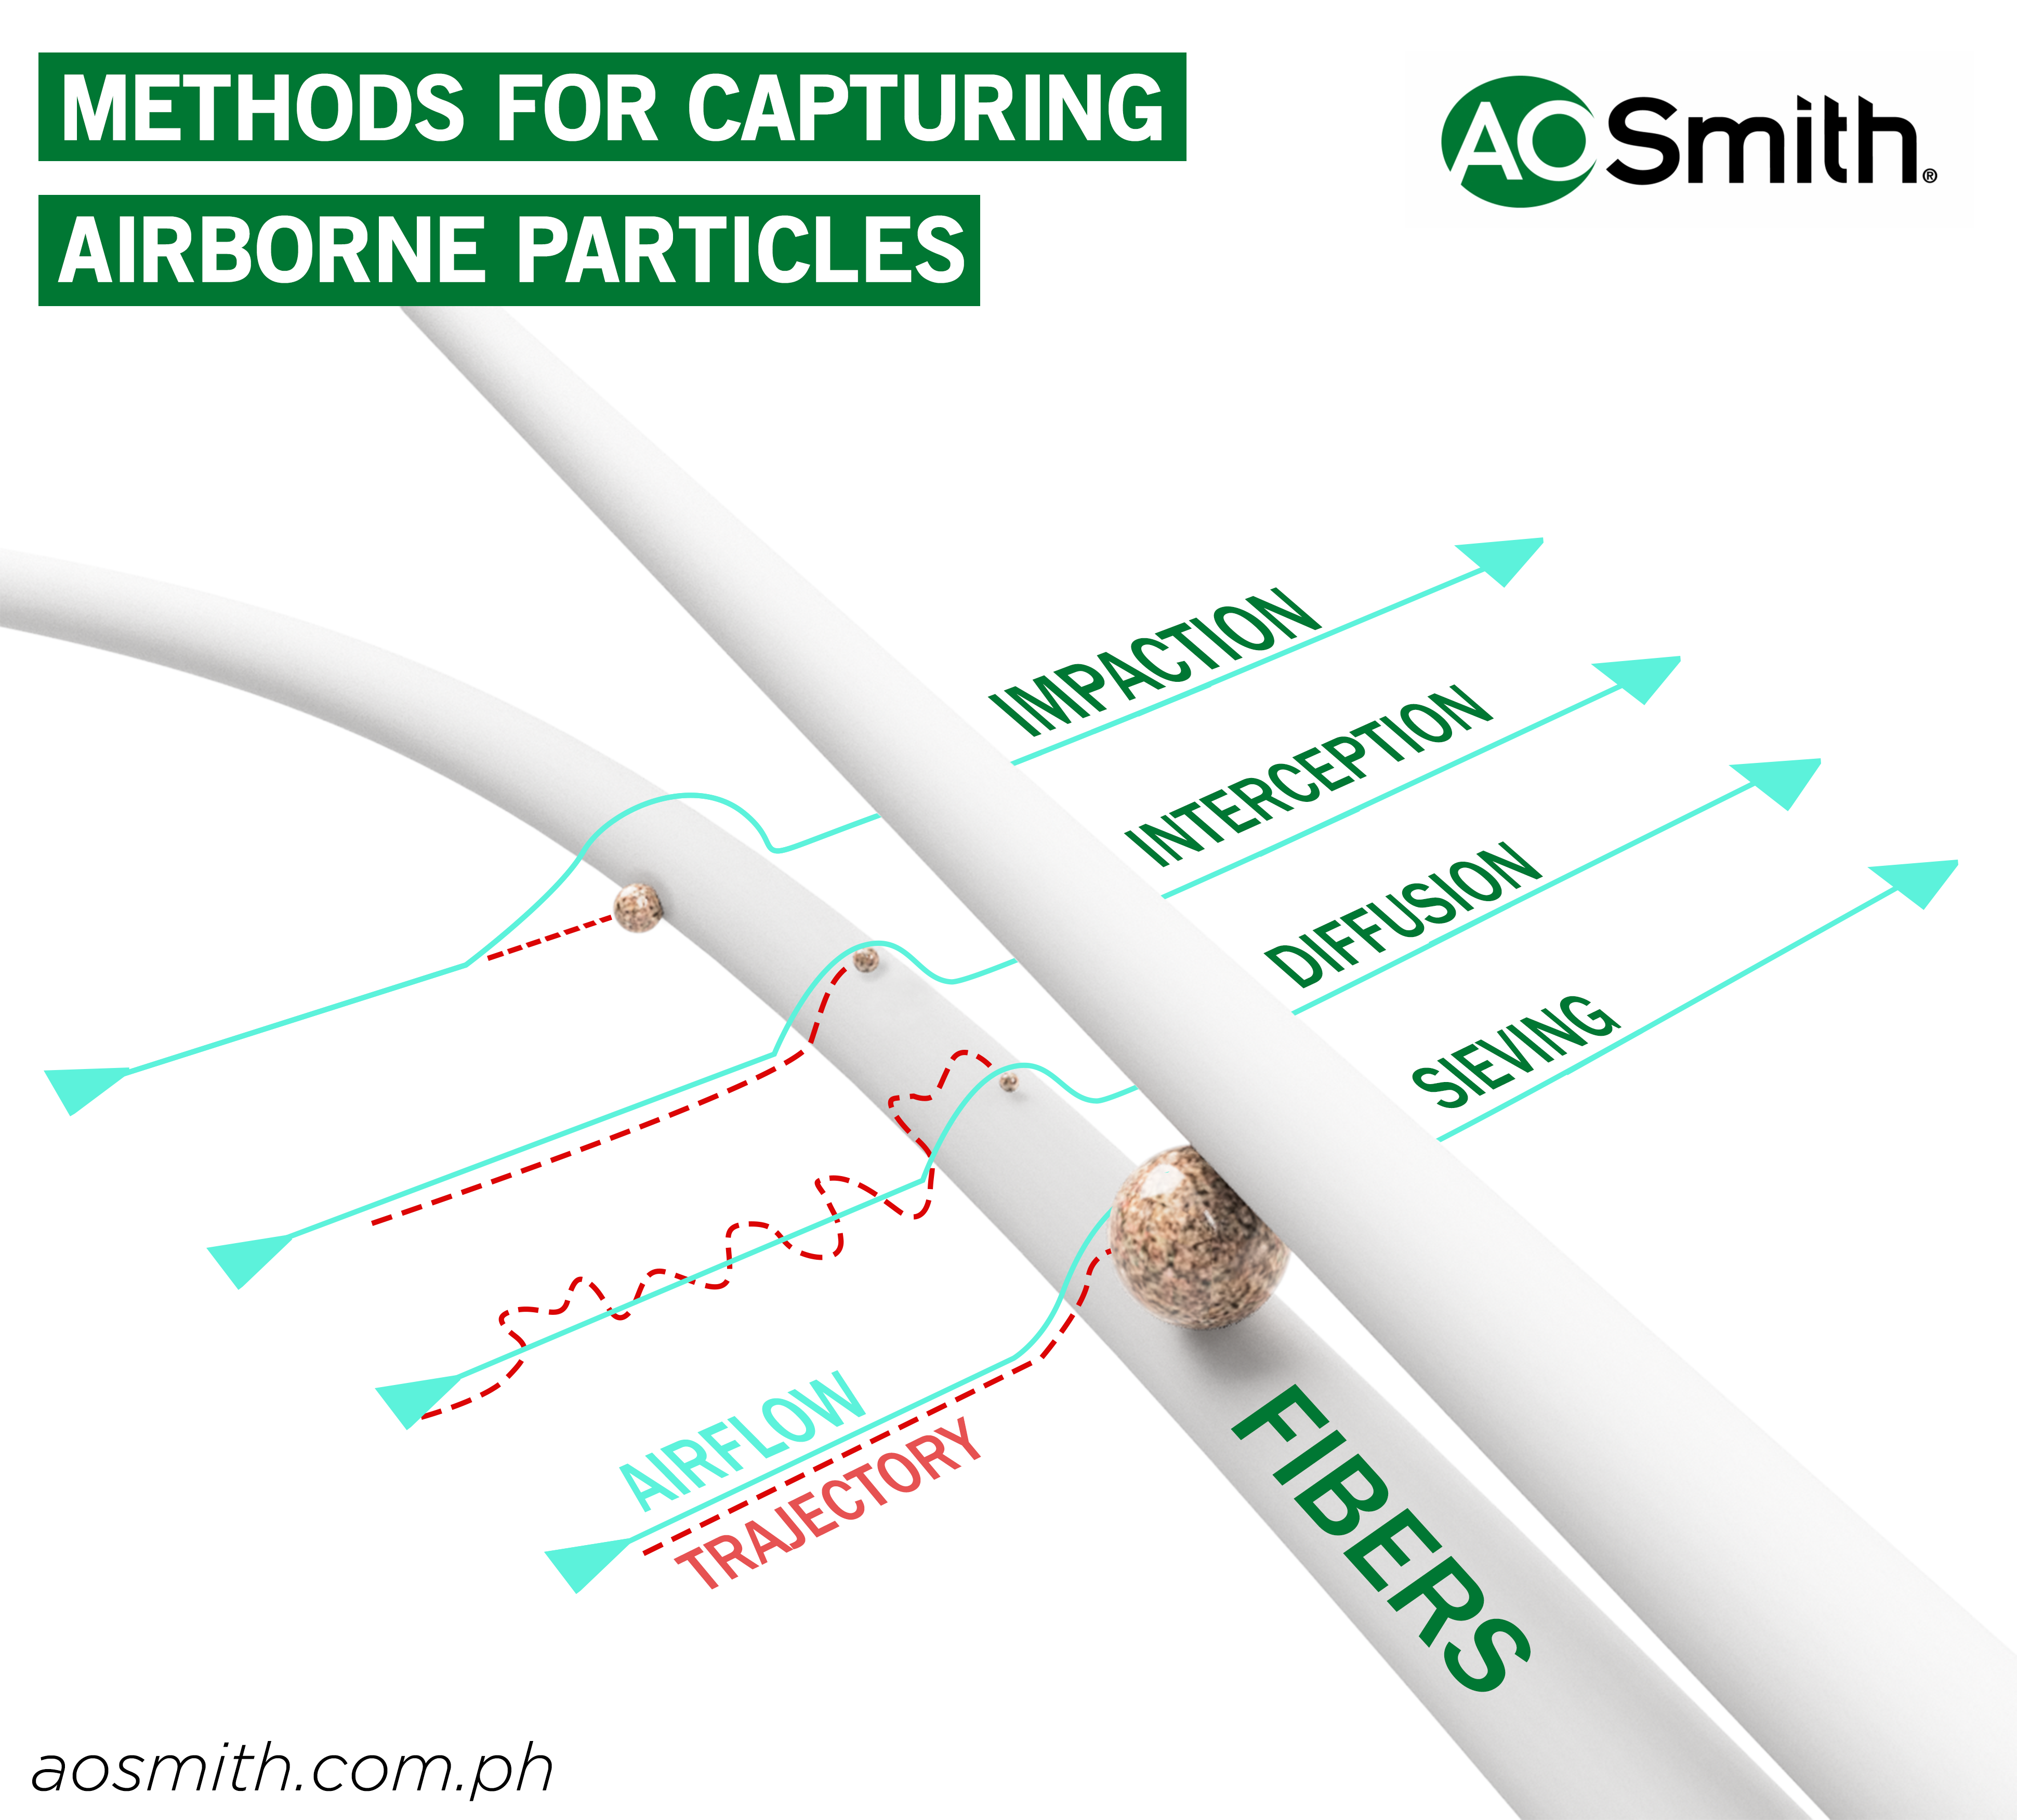 4 METHODS FOR CAPTURING: IMPACTION, INTERCEPTION, DIFFUSSION, SIEVING